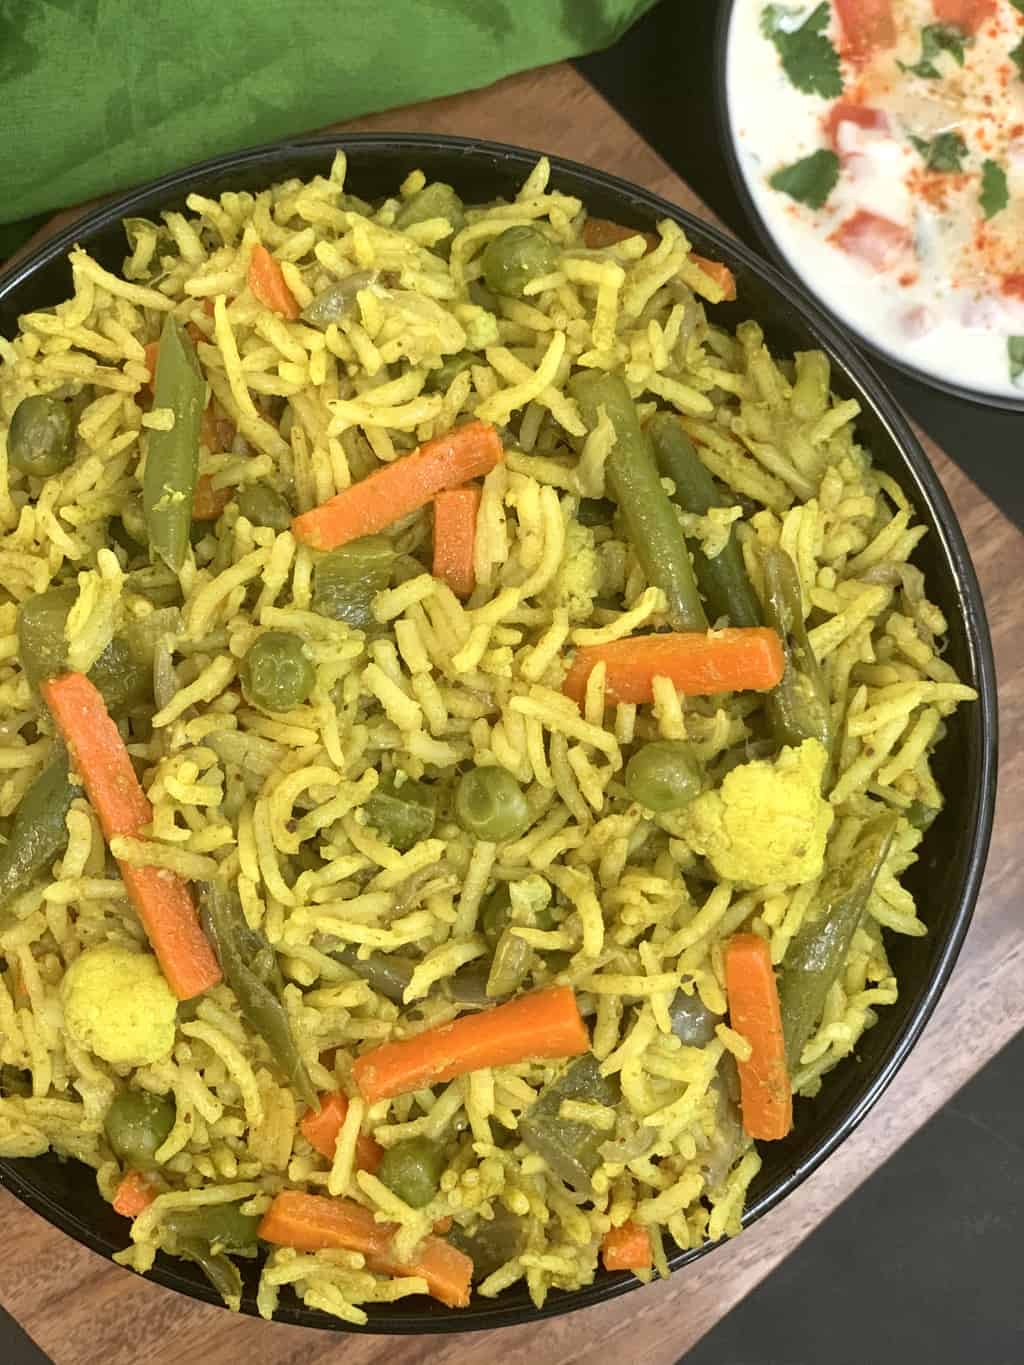 veg pulao served in a bowl with raita on the side